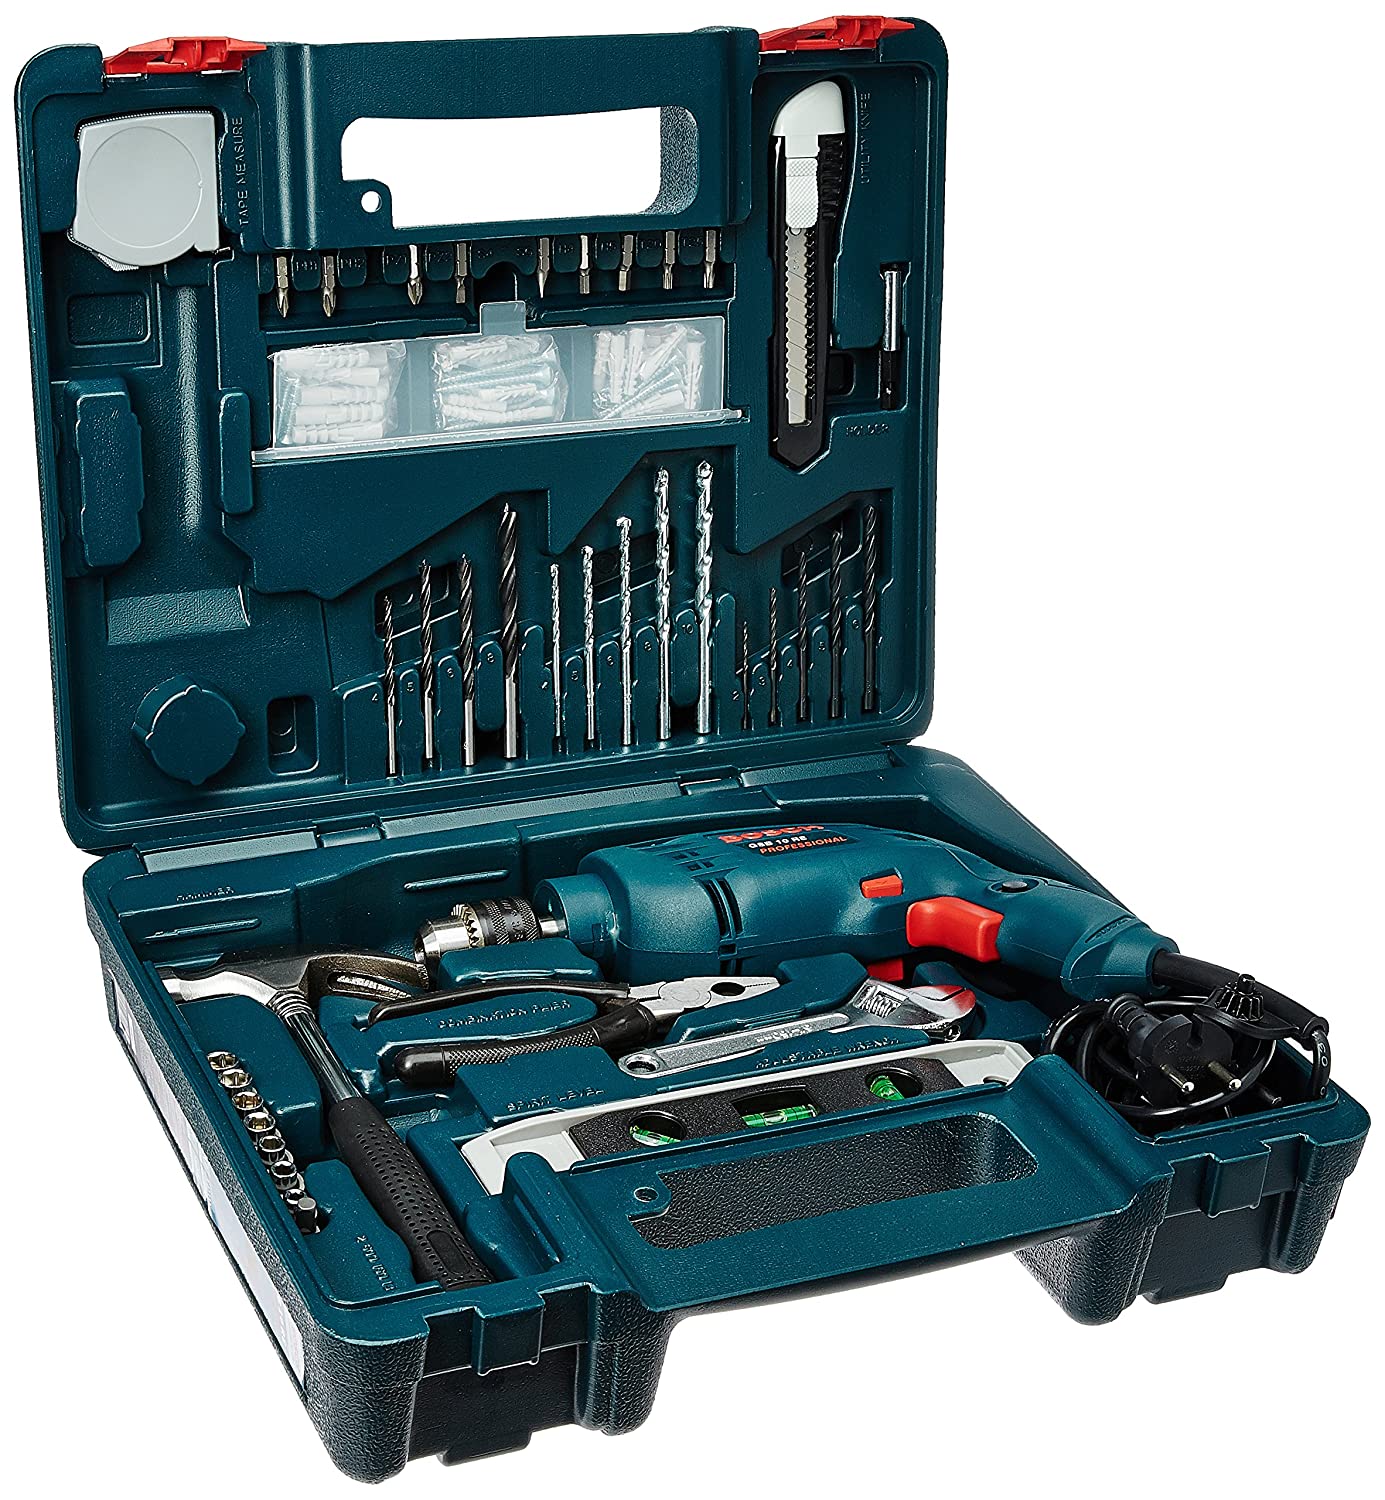 drill machine for home use - Bosch GSB 500W 500 RE Tool Set